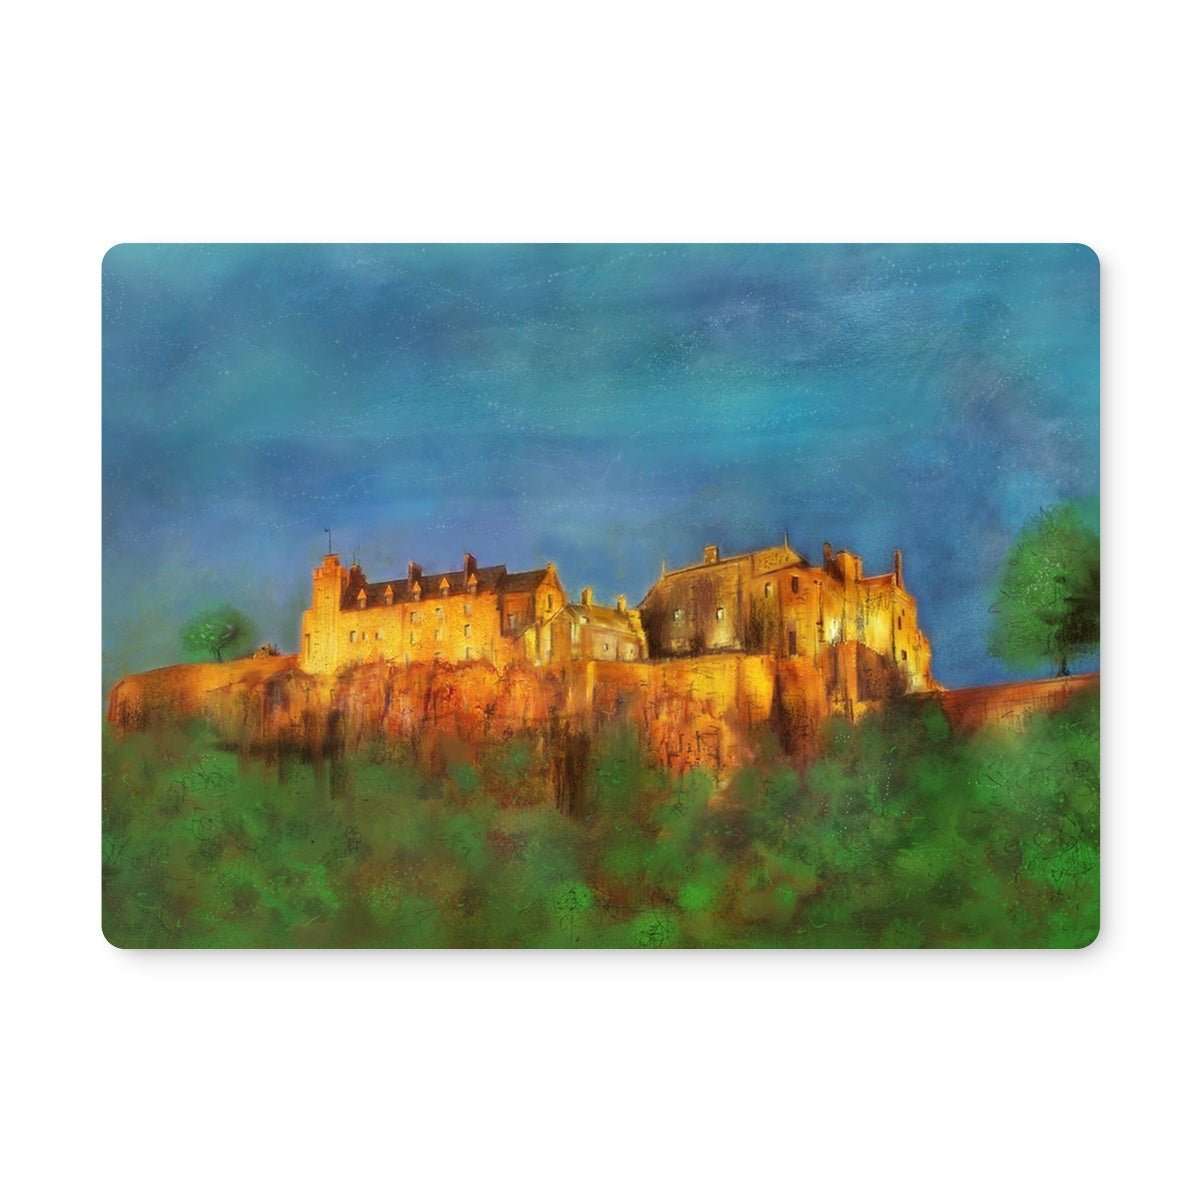 Stirling Castle Art Gifts Placemat-Placemats-Scottish Castles Art Gallery-2 Placemats-Paintings, Prints, Homeware, Art Gifts From Scotland By Scottish Artist Kevin Hunter